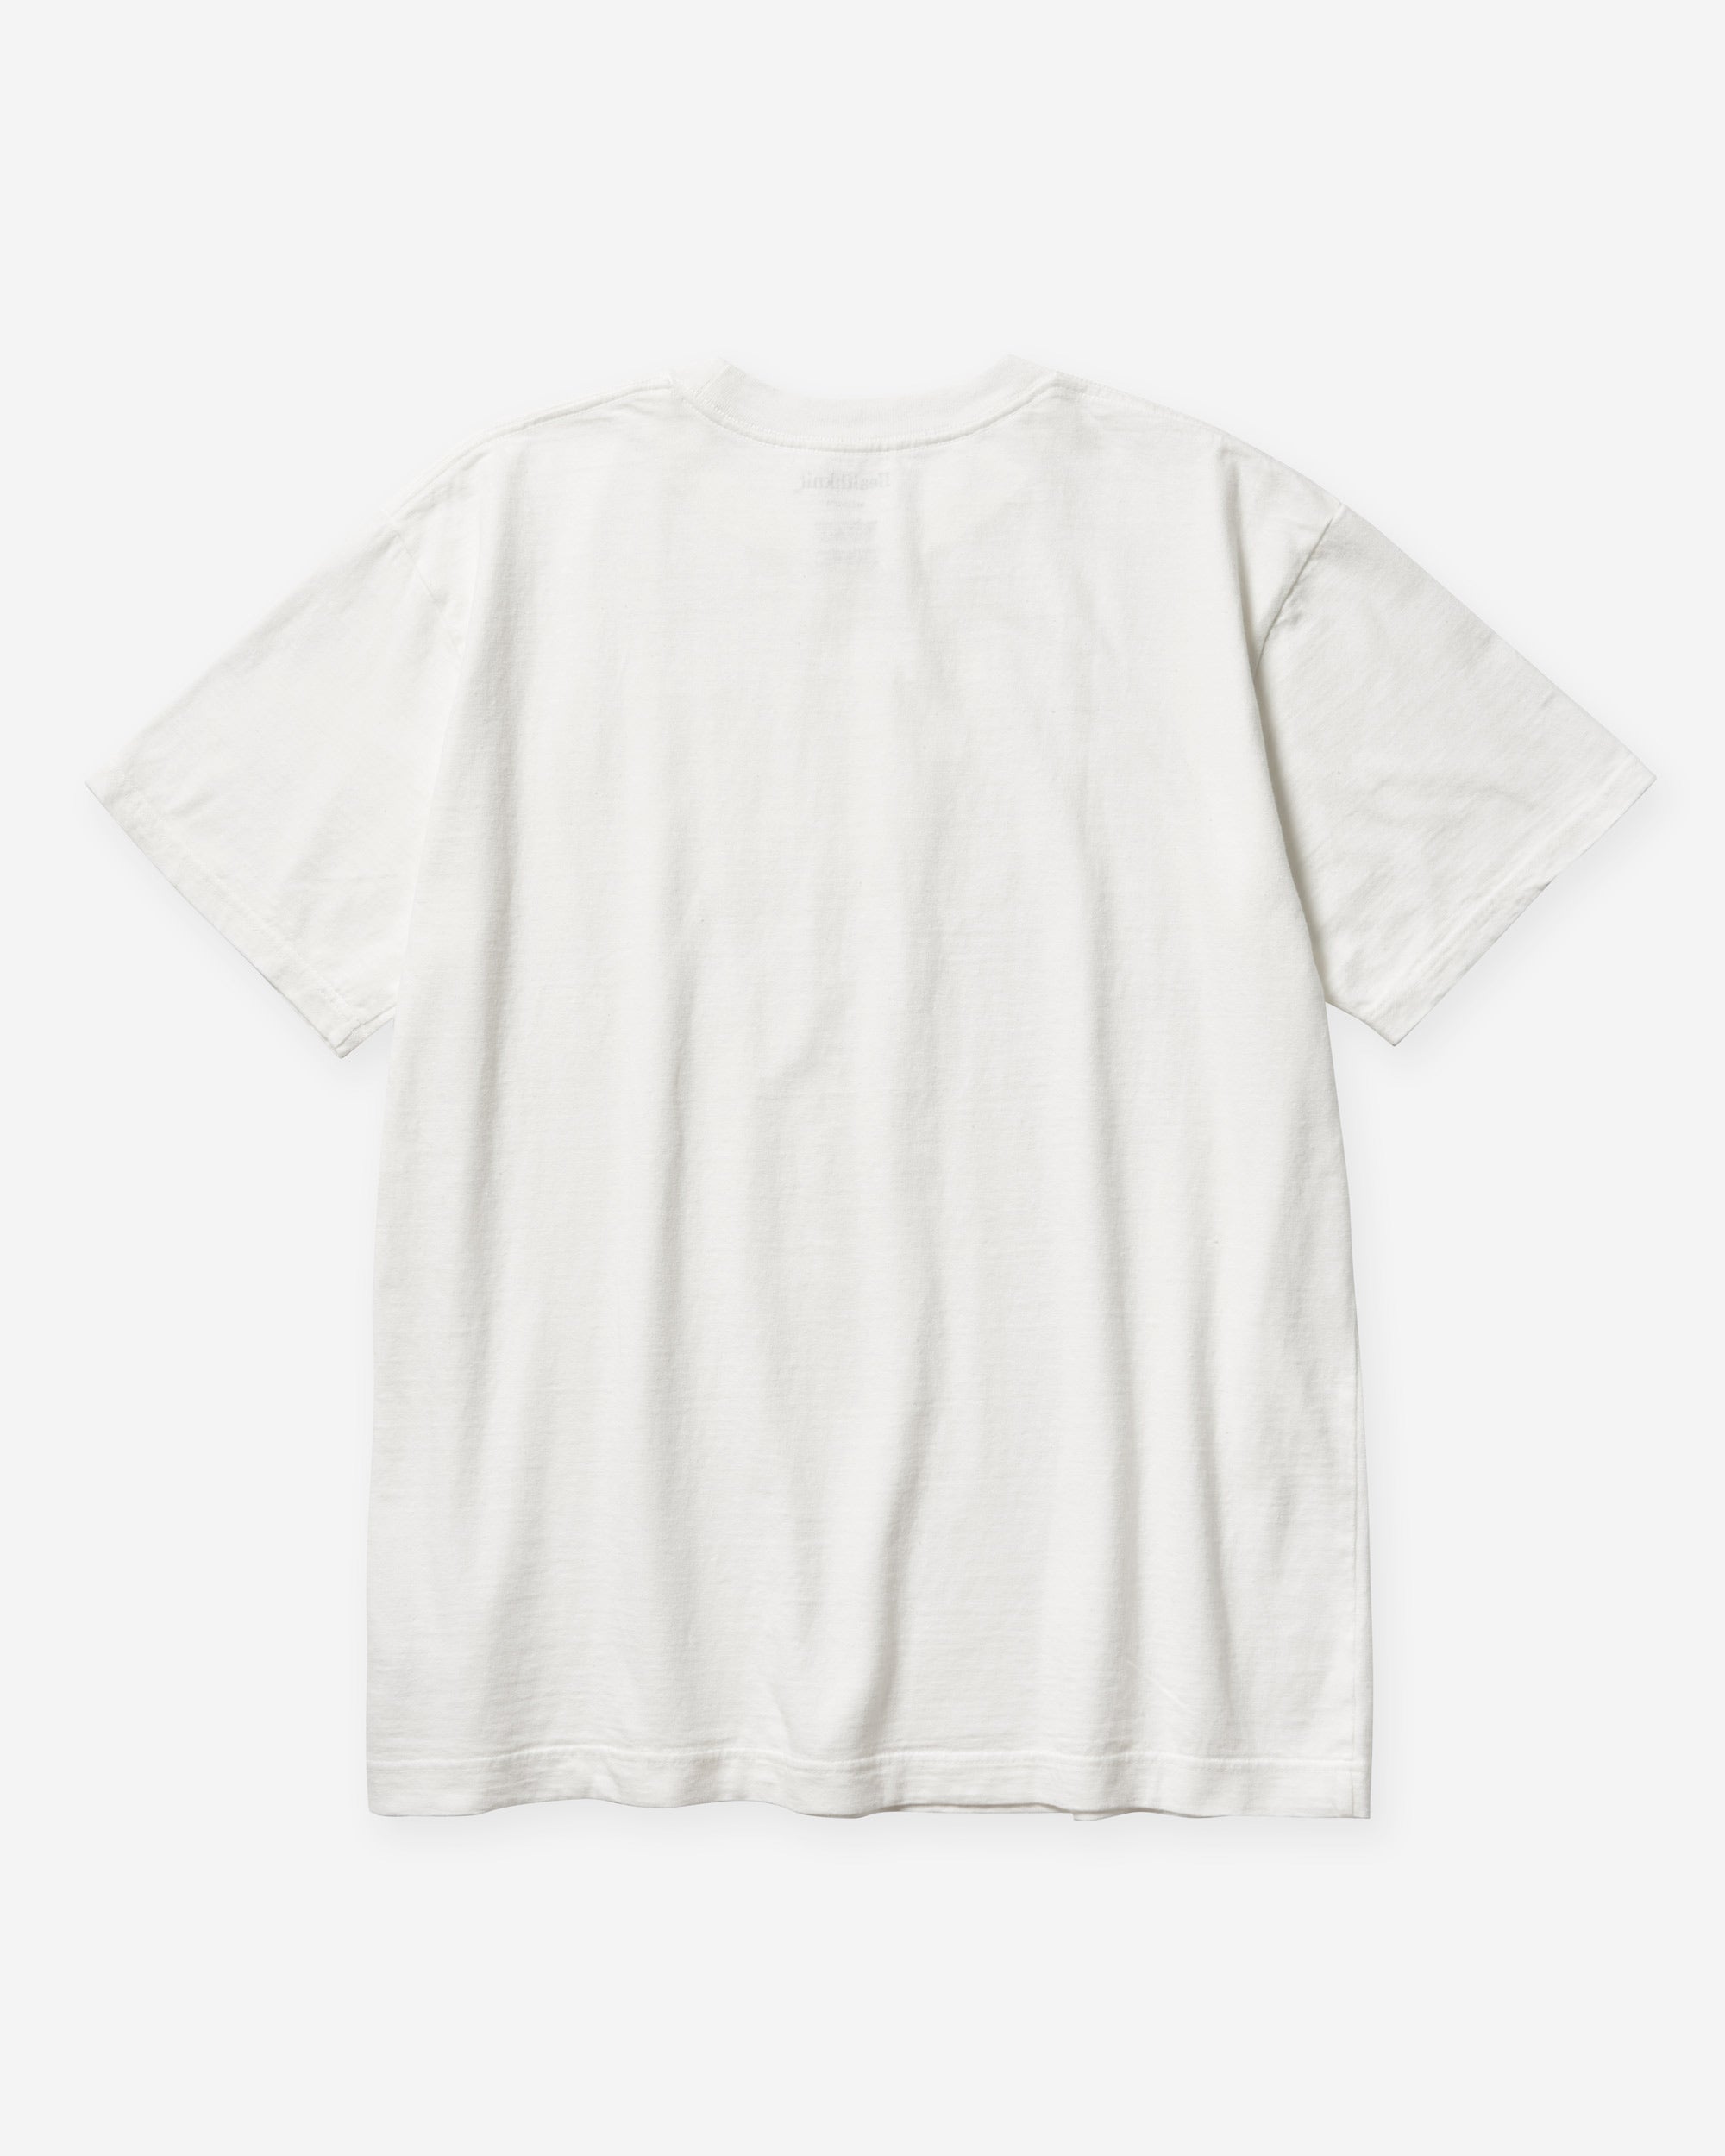 Recycled Cotton Blend Crewneck S/S - White